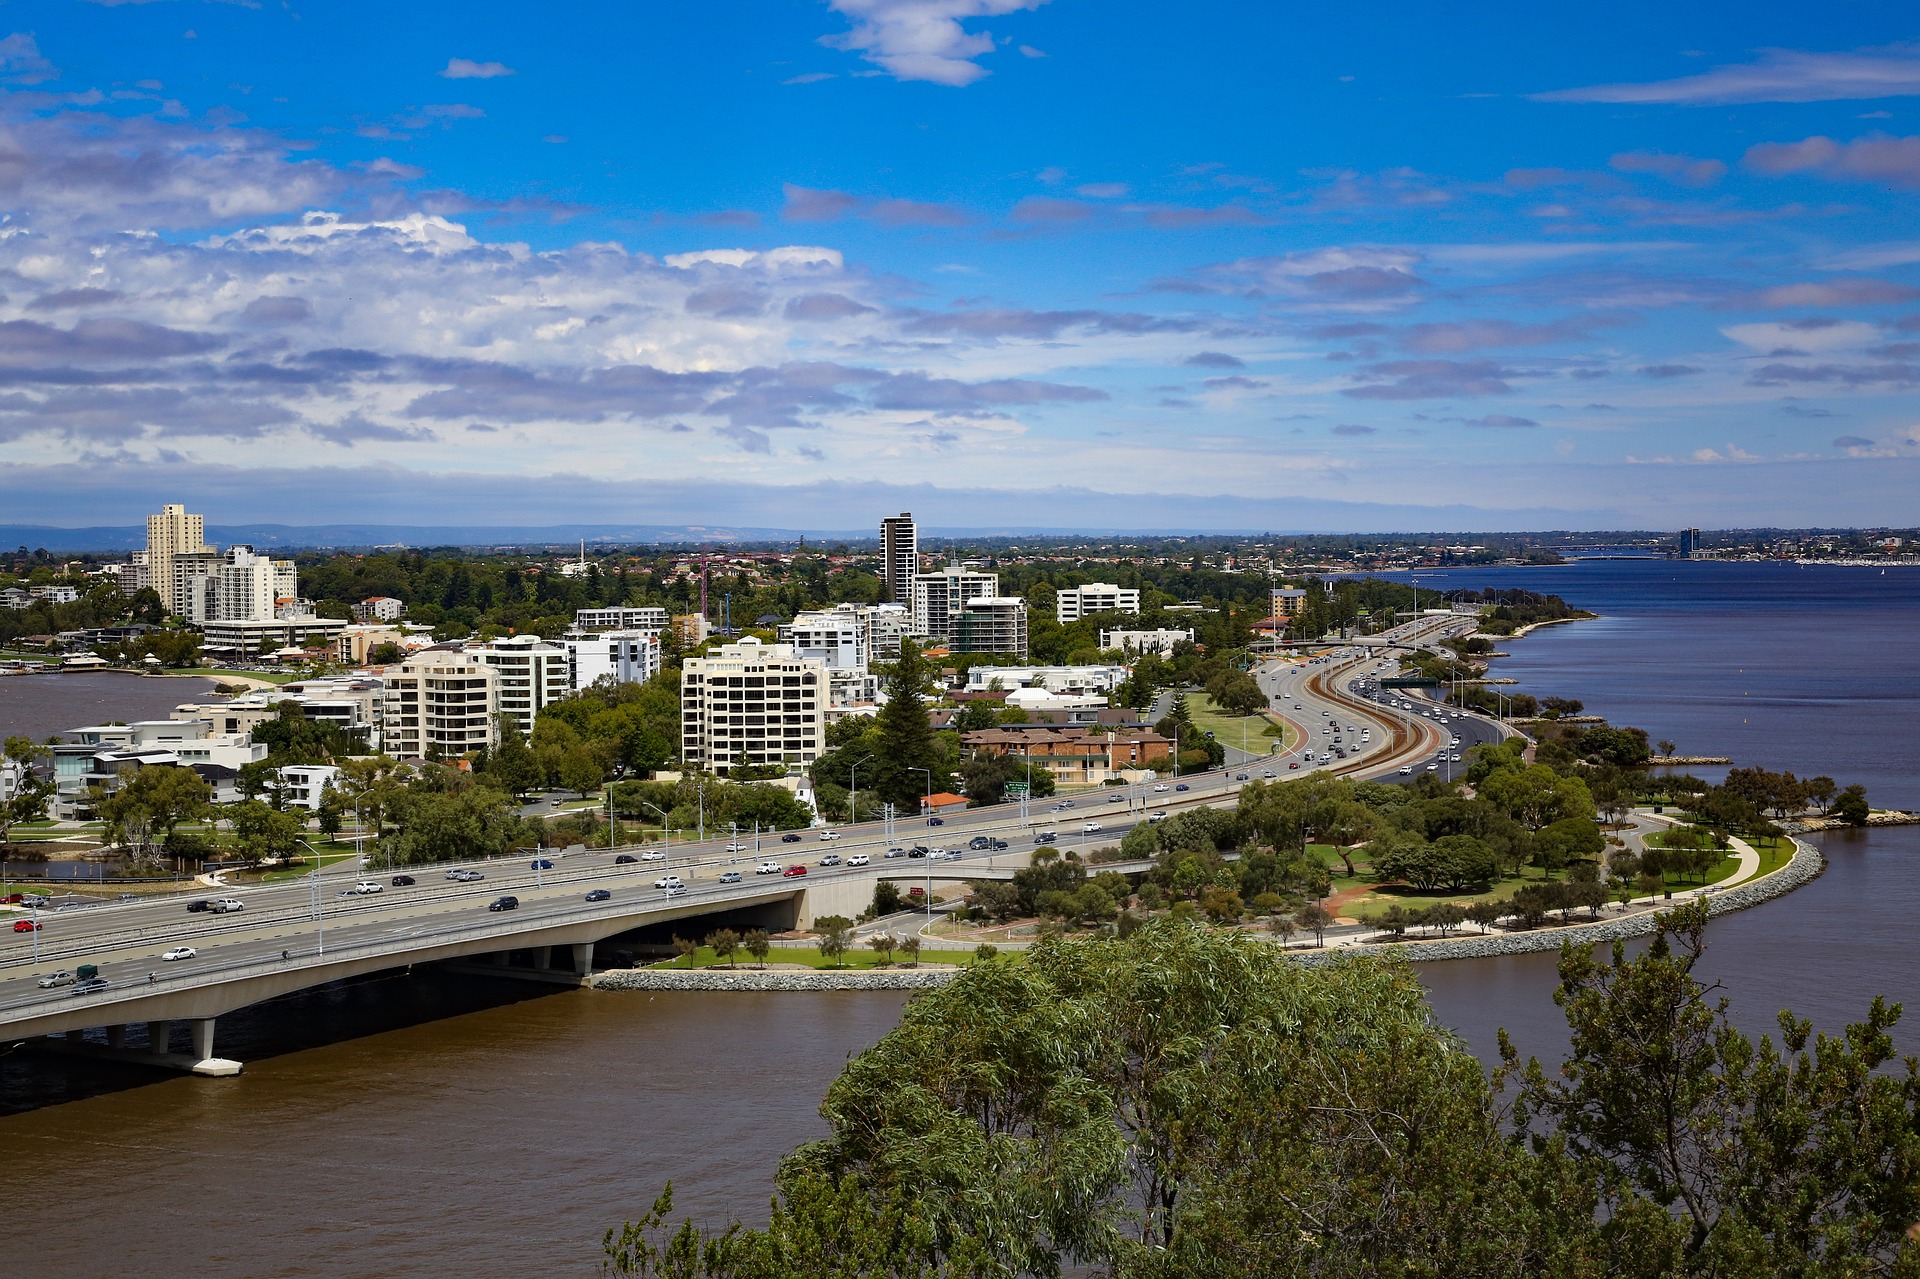 aerial view of perth skyline with buidings and bridge over water